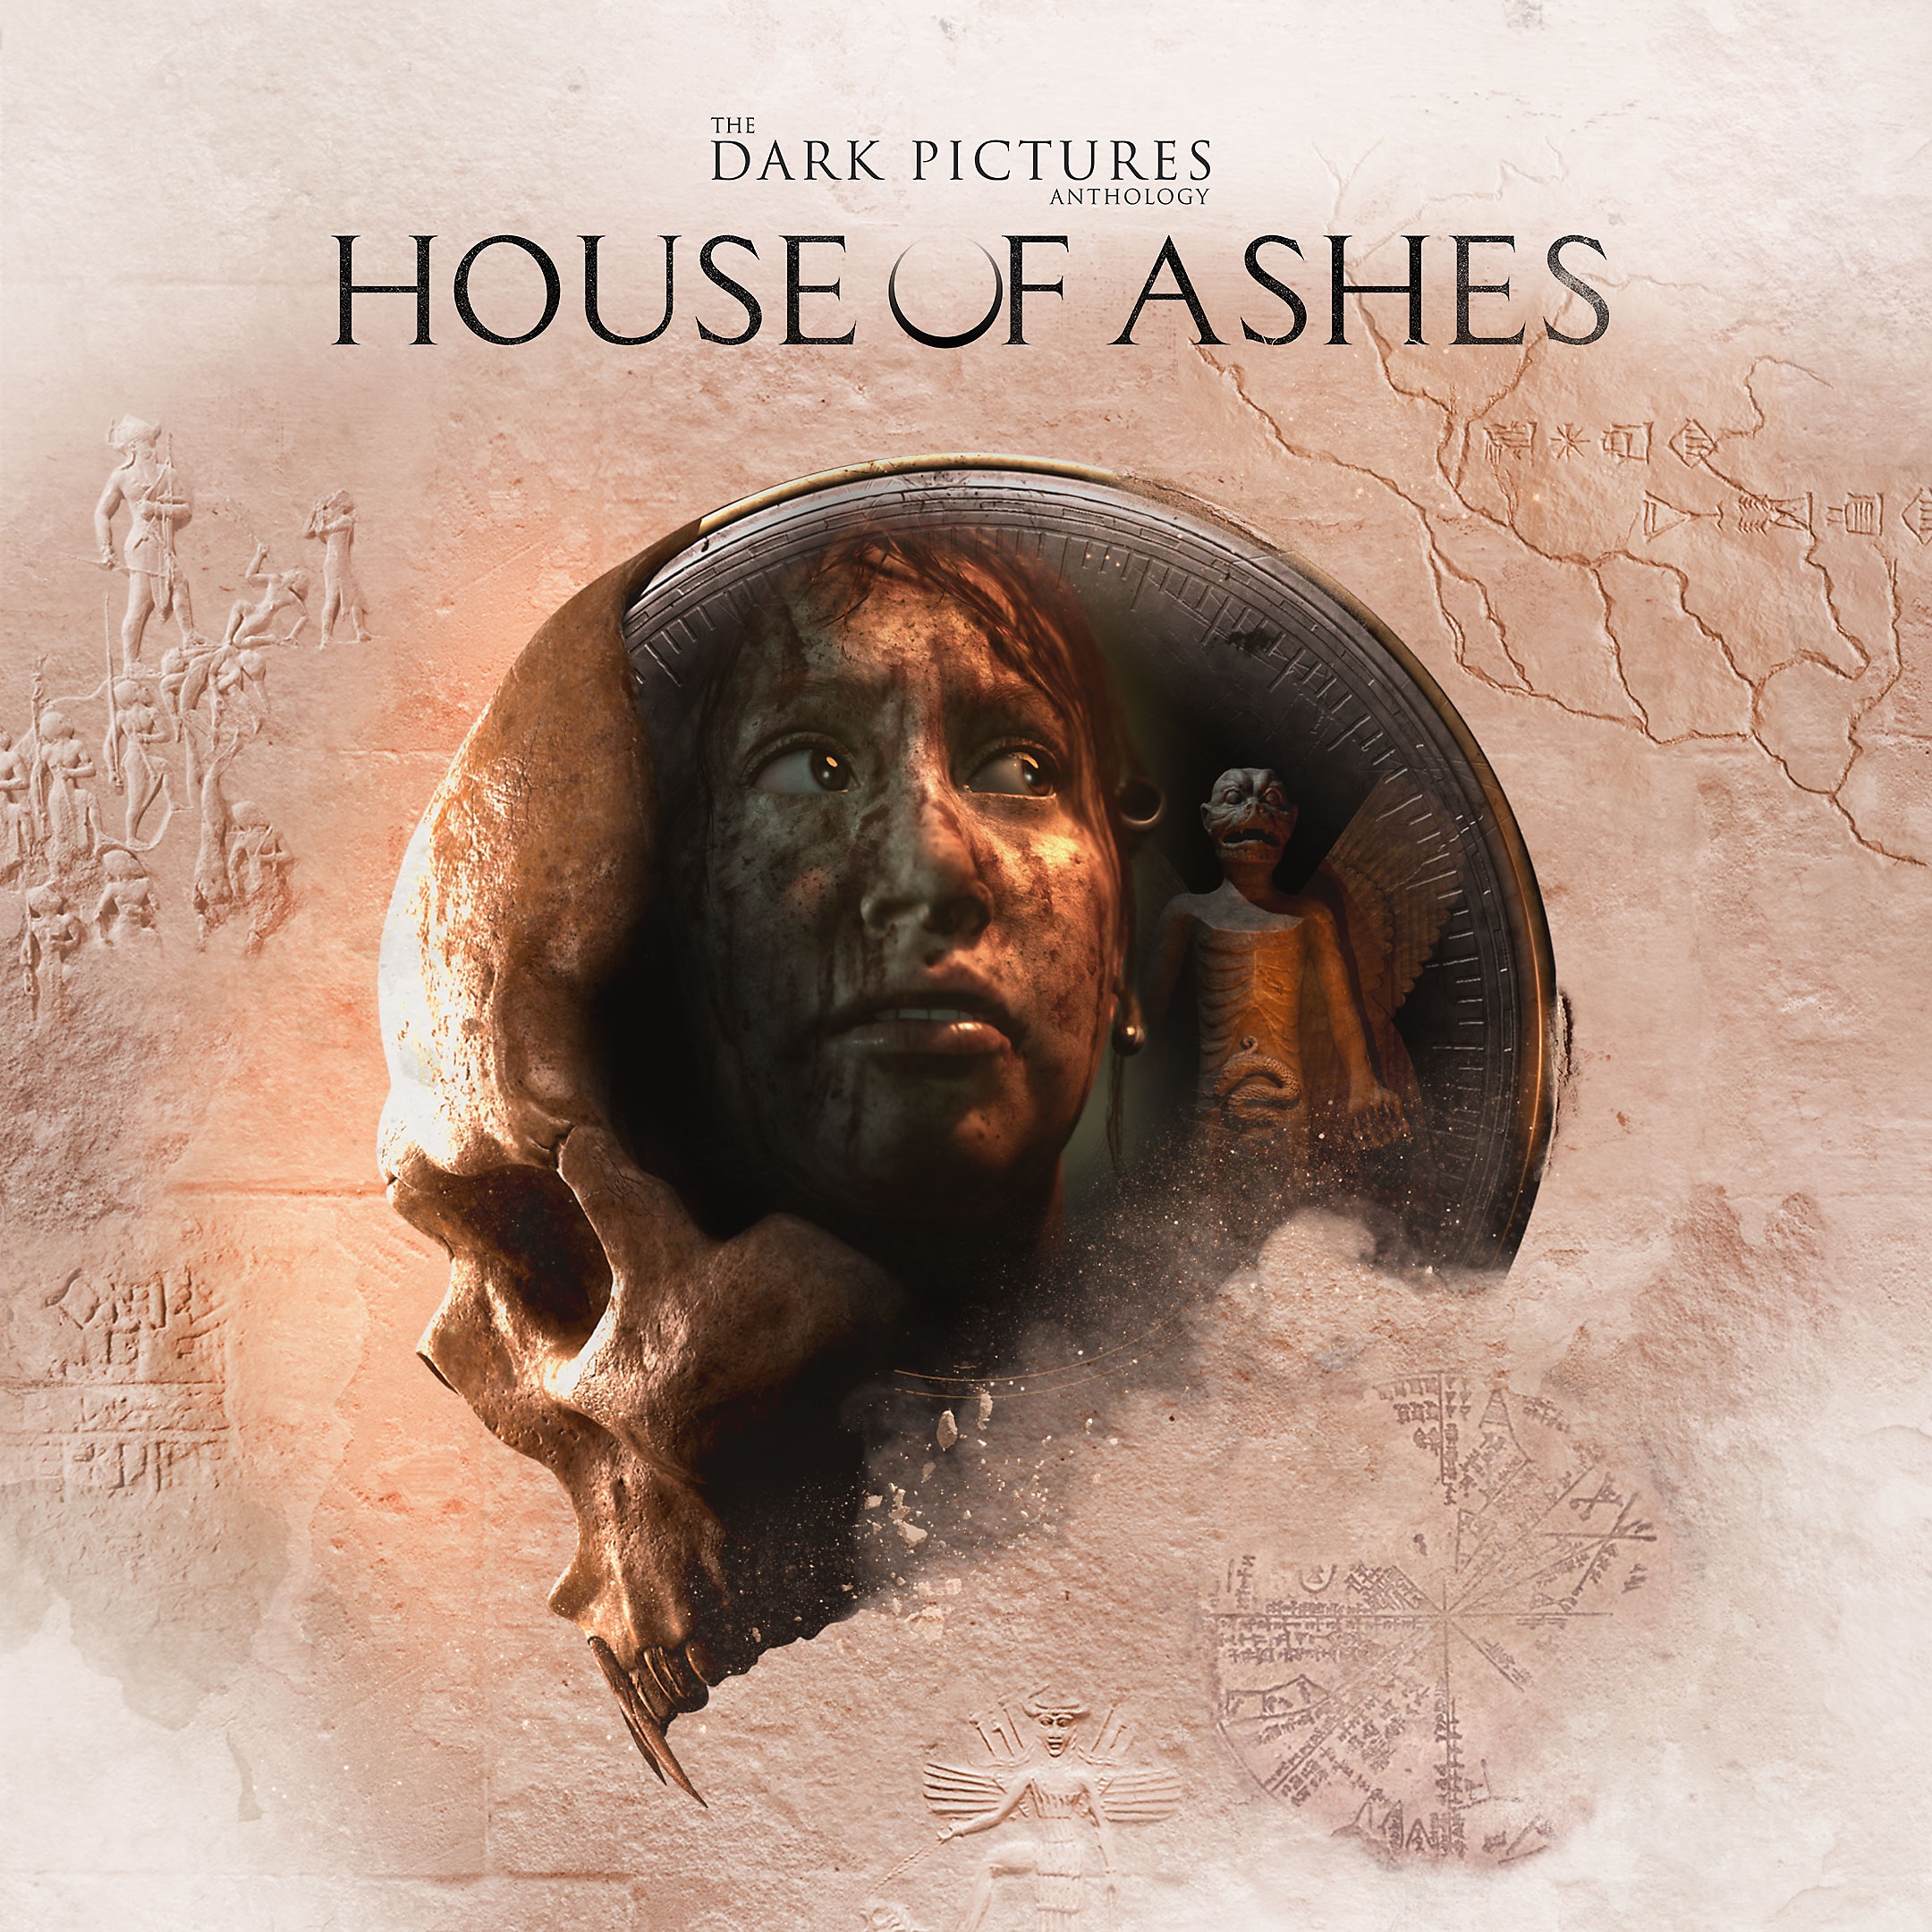 The Dark Pictures Anthology: House of Ashes arte de tienda